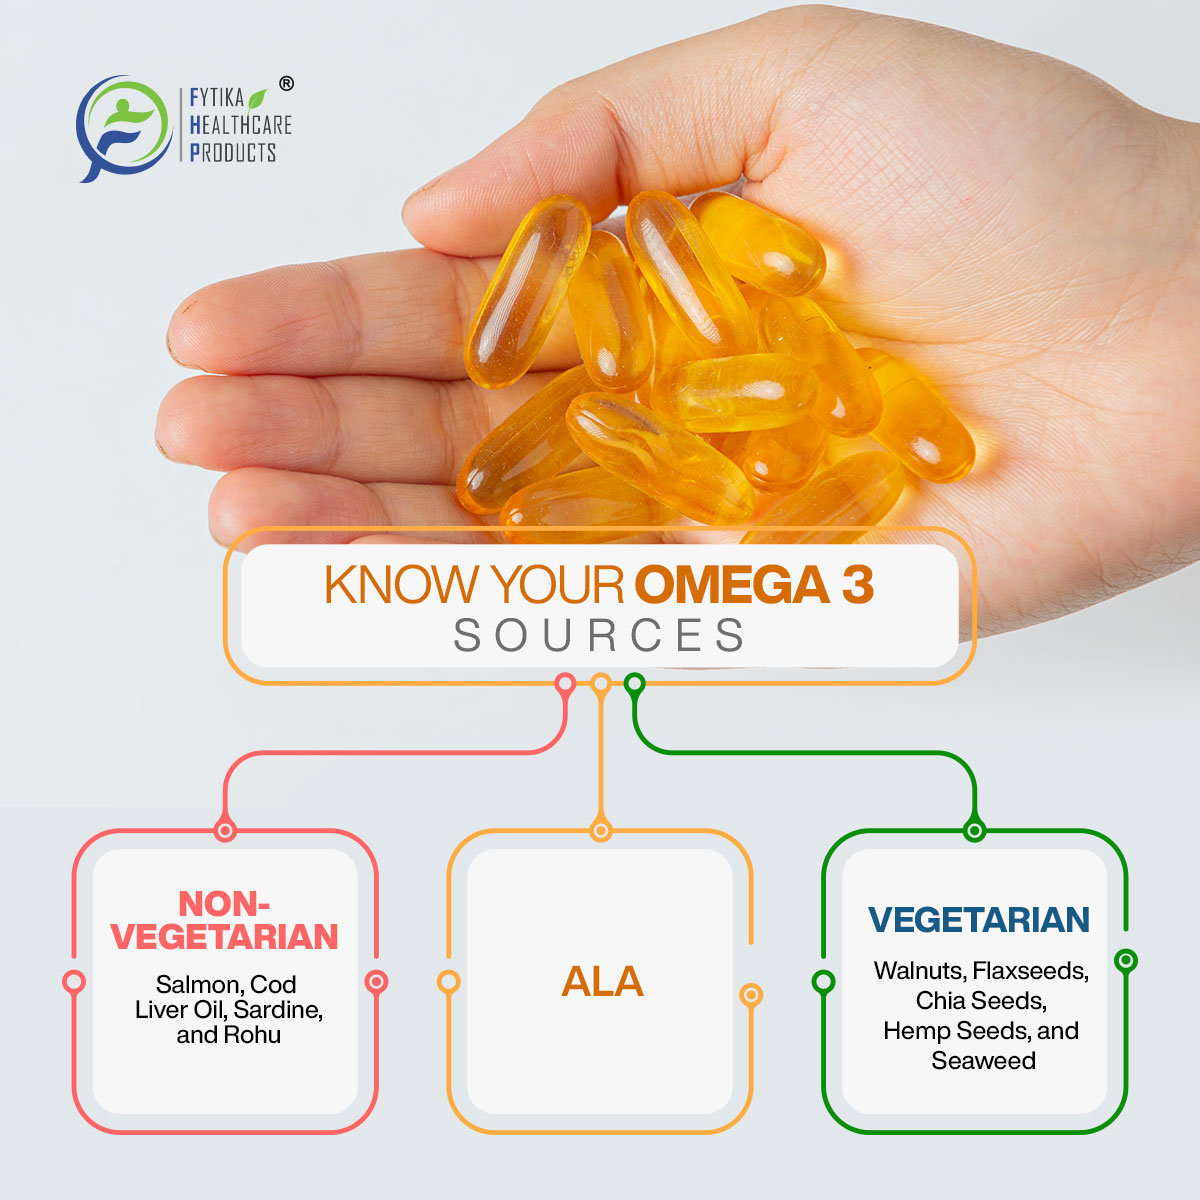 Did you know that these essential nutrients play a crucial role in our daily functions? #Fytika #Fytikahealthcare #FytikaOmega1000 #FytikaOmegaCapsules #FytikaHealthcareProducts #Omega3s #Fishoilcapsules #EPA #DHA